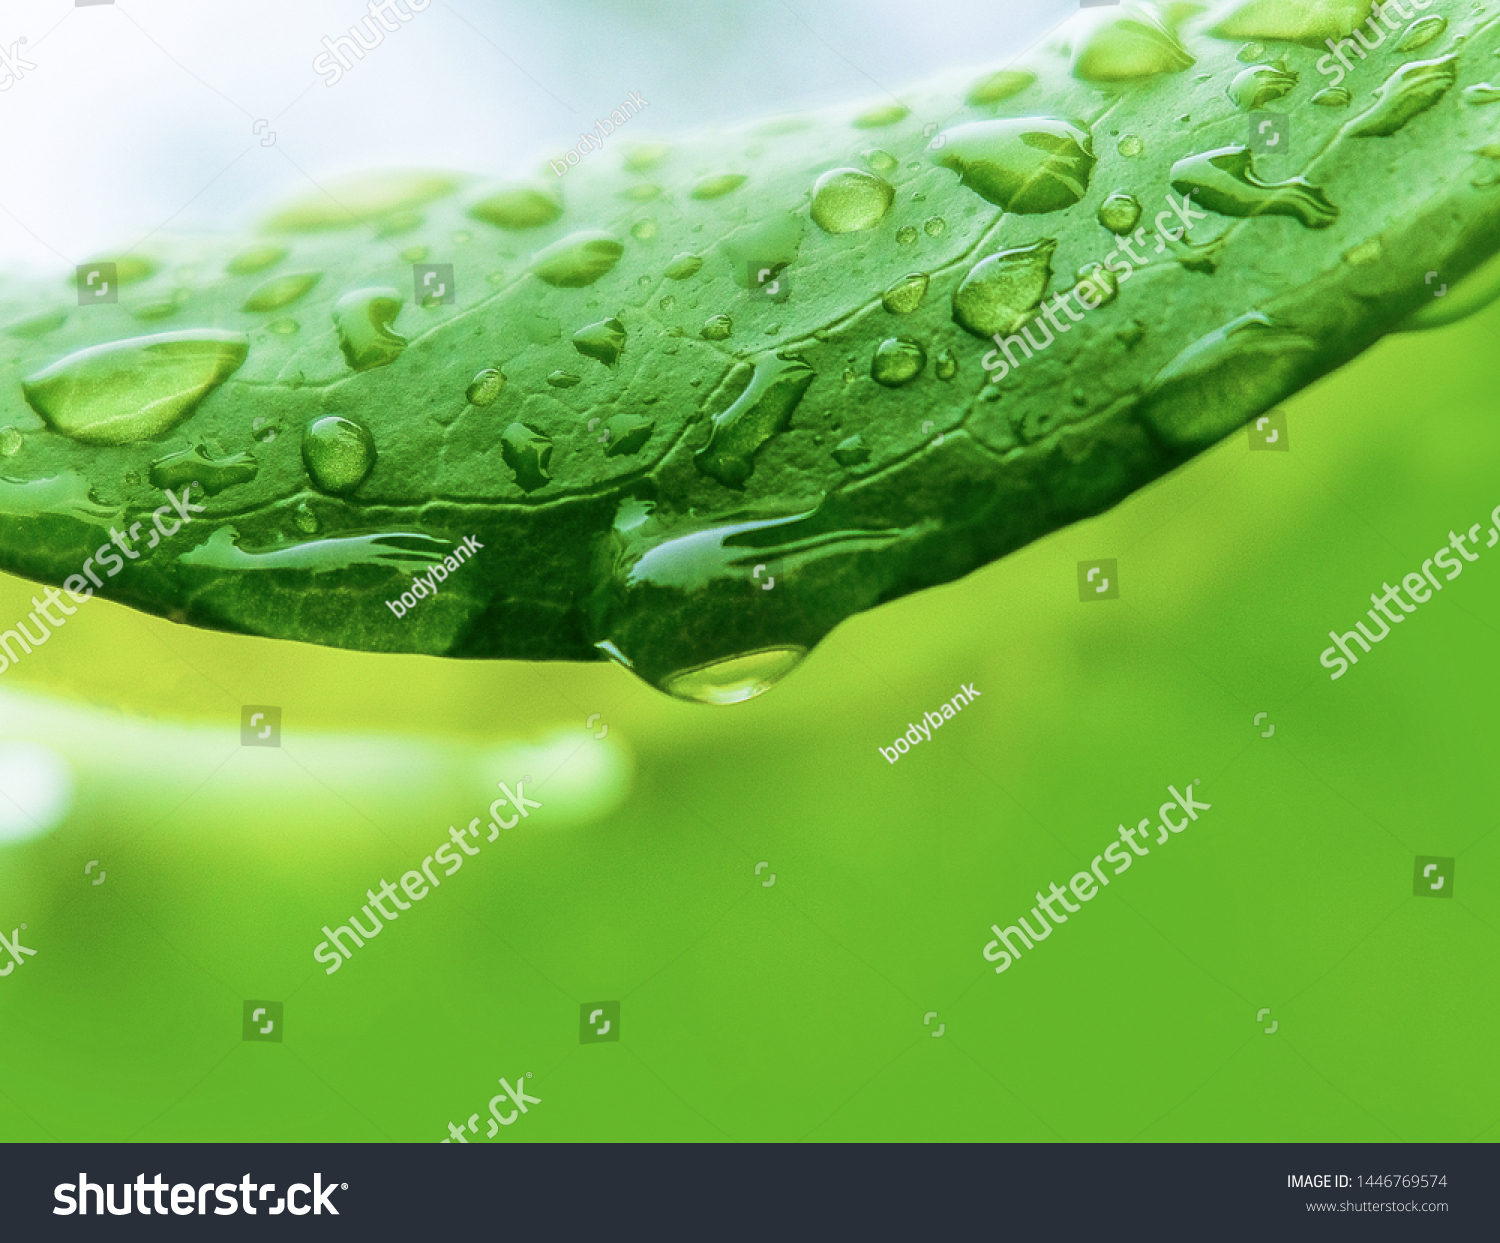 Closeup nature view of green leaf on blurred greenery background in garden with copy space using as background natural green plants landscape, ecology. Blurred green bokeh nature abstract background #1446769574